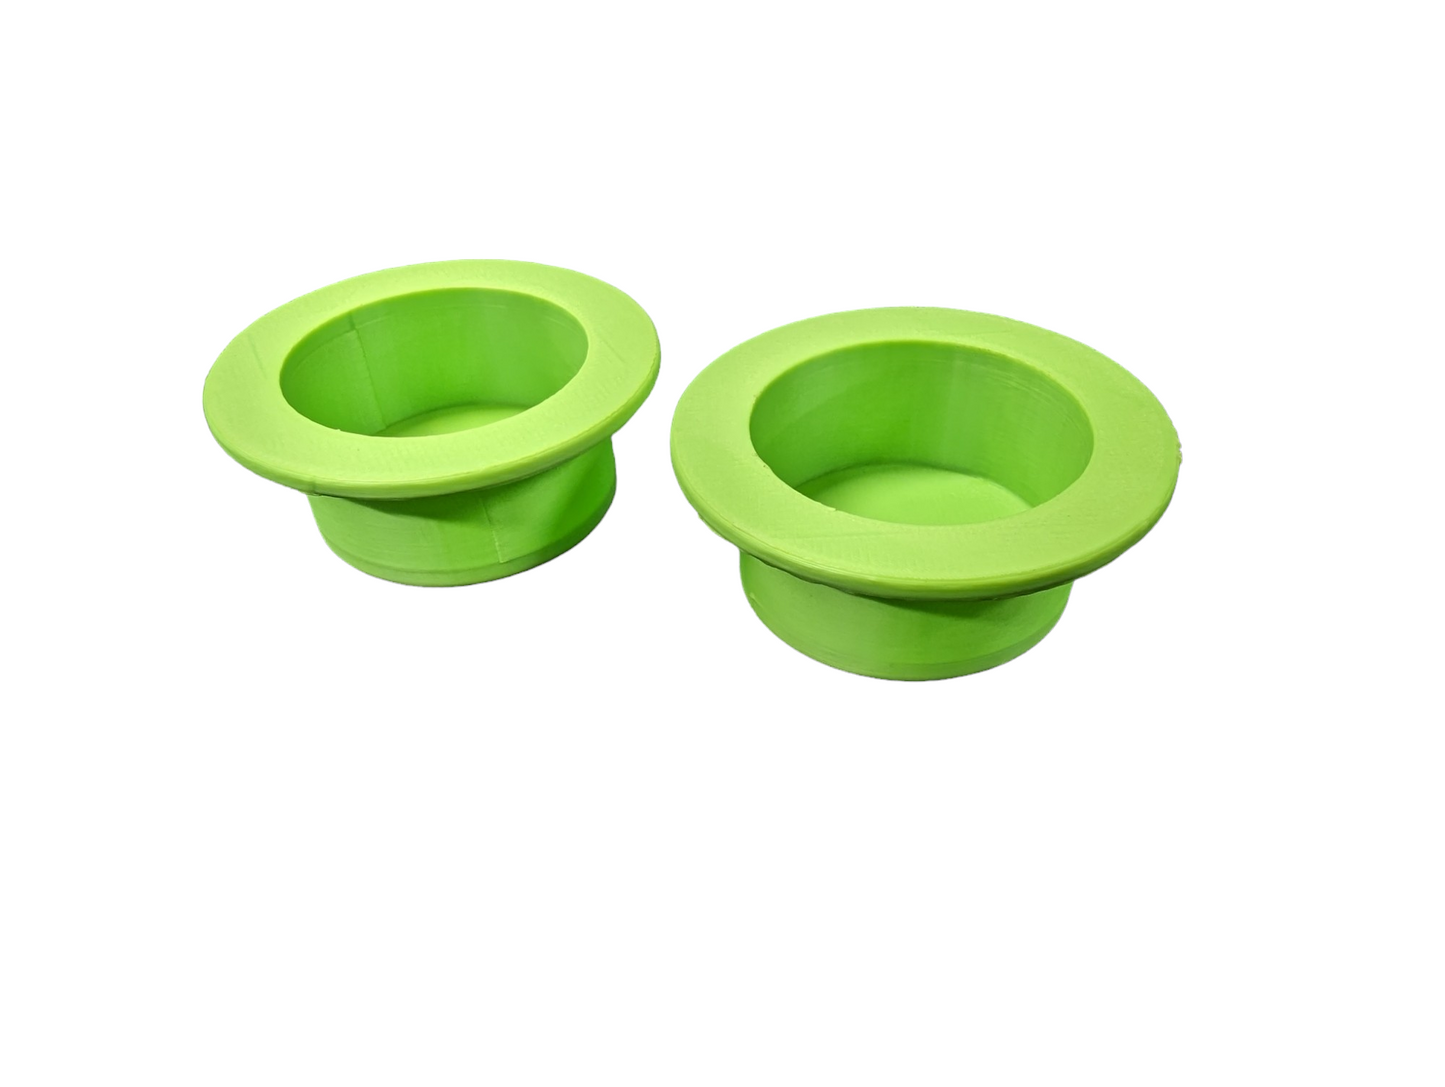 0.5oz 3D Printed Food Dishes